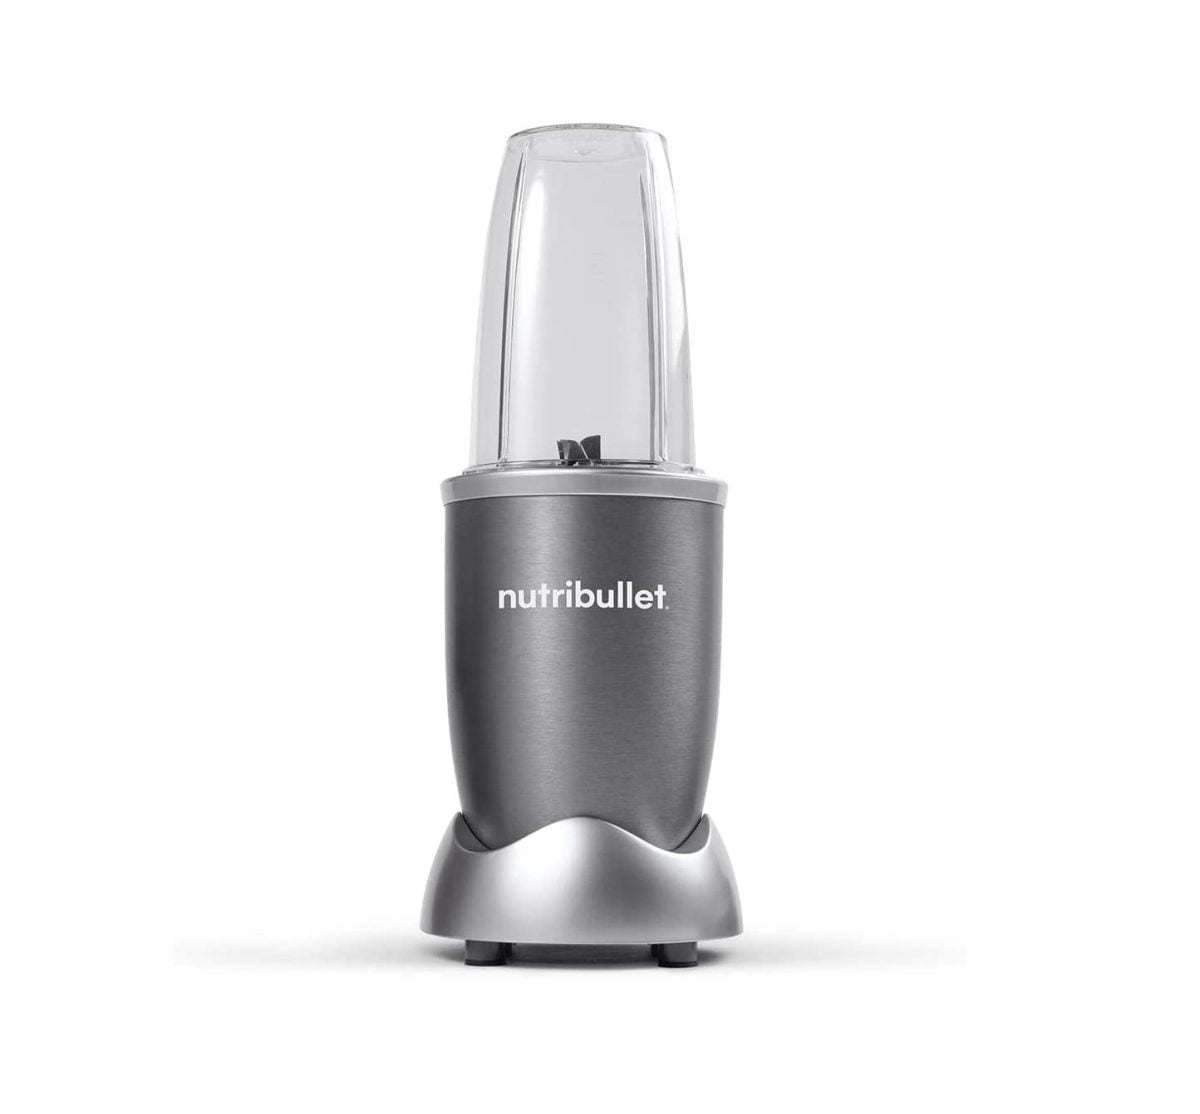 51Gribtjdl. Ac Sl1482 &Lt;Ul Class=&Quot;A-Unordered-List A-Vertical A-Spacing-Mini&Quot;&Gt; &Lt;Li&Gt;&Lt;Span Class=&Quot;A-List-Item&Quot;&Gt;Meet The Most Popular Nutribullet, Our Compact-Yet-Powerful Personal Blender. You Choose What Goes In To Get The Most Out Of Every Ingredient, Every Day.&Lt;/Span&Gt;&Lt;/Li&Gt; &Lt;Li&Gt;&Lt;Span Class=&Quot;A-List-Item&Quot;&Gt;The Nutribullet Is The Fastest, Easiest Solution For Making Nutrient-Packed Smoothies. Load It Up With Your Favorite Whole Foods Like Nuts, Berries, And Spinach, Then Push, Twist, And Blend Your Way To A Healthier Lifestyle.&Lt;/Span&Gt;&Lt;/Li&Gt; &Lt;Li&Gt;&Lt;Span Class=&Quot;A-List-Item&Quot;&Gt;Powerful 600-Watt Motor And Refined Nutrient-Extraction Blades Blend Whole Foods Into Liquid Fuel For Your Body - In Seconds.&Lt;/Span&Gt;&Lt;/Li&Gt; &Lt;Li&Gt;&Lt;Span Class=&Quot;A-List-Item&Quot;&Gt;Hassle-Free Cleaning - Simply Twist Off The Blade, Rinse With Soap And Water, And Put The Cups In The Top Rack Of The Dishwasher.&Lt;/Span&Gt;&Lt;/Li&Gt; &Lt;Li&Gt;&Lt;Span Class=&Quot;A-List-Item&Quot;&Gt;What You Get: (1) 600 Watt Motor Base, (1) Extractor Blade, (1) 700Ml Cup, (1) 500Ml Cup, (1) Lip Ring With Handle, (1) Solid Lid, (1) User Guide, (1) Recipe Book. 2 Years Brand Warranty&Lt;/Span&Gt;&Lt;/Li&Gt; &Lt;/Ul&Gt; Nutribullet Nutribullet 600 Watts, 8 Piece Set, Multi-Function High Speed Blender, Mixer System With Nutrient Extractor, Smoothie Maker, Gray